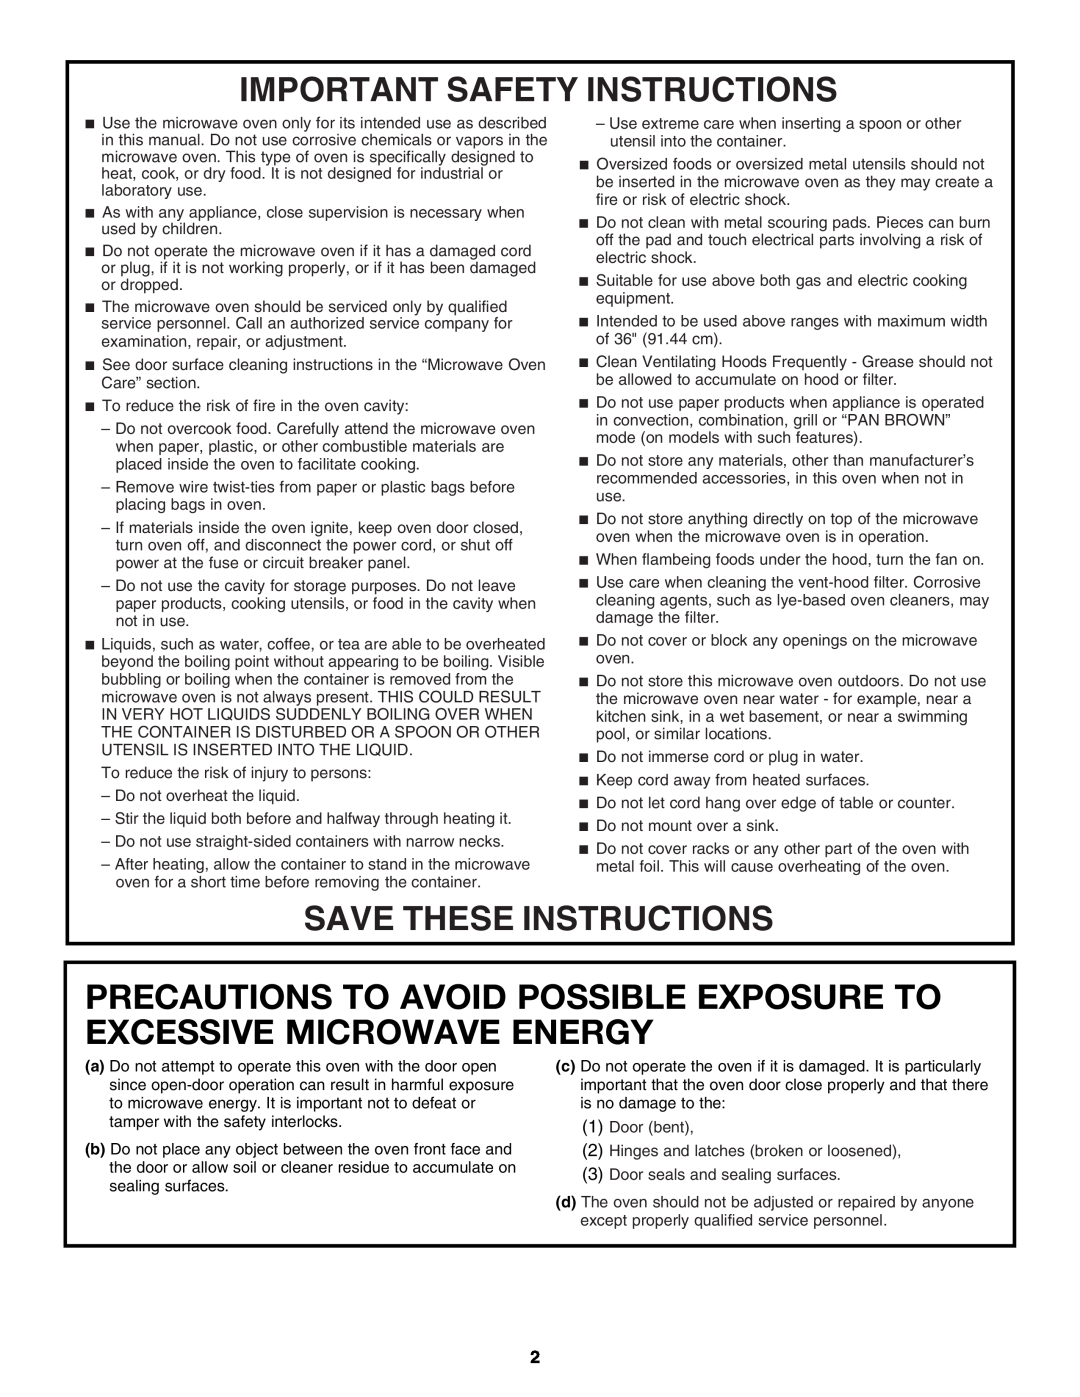 Maytag W10306246A Precautions To Avoid Possible Exposure To Excessive Microwave Energy, Important Safety Instructions 